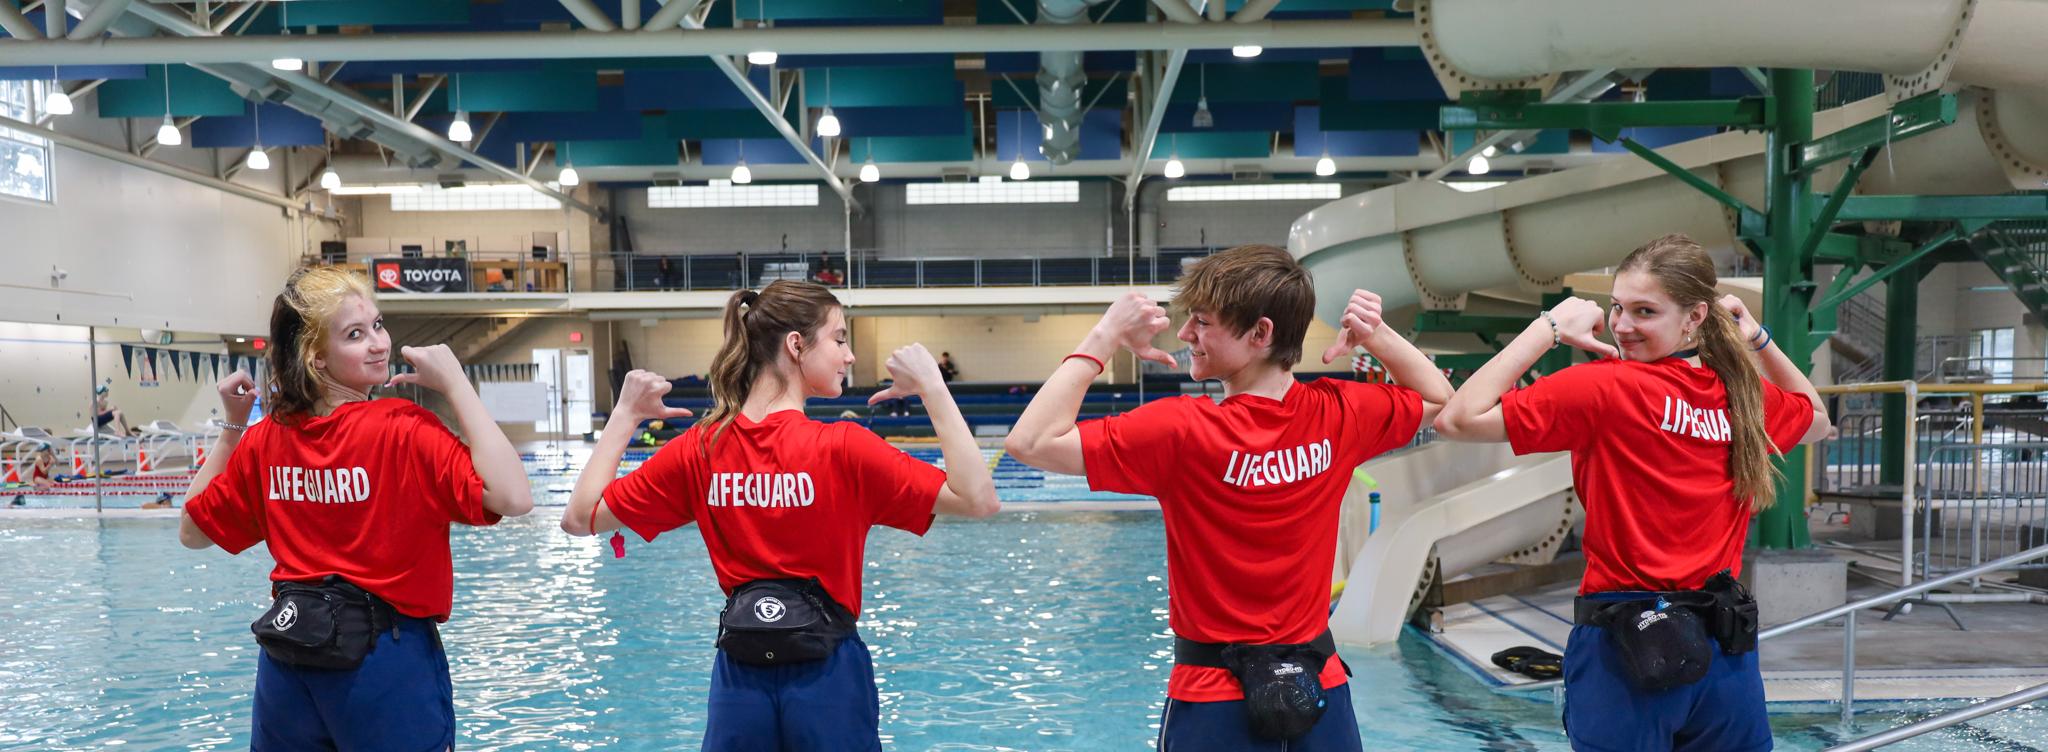 Four young lifeguards point to their lifeguard shirts while posing in front of the pool